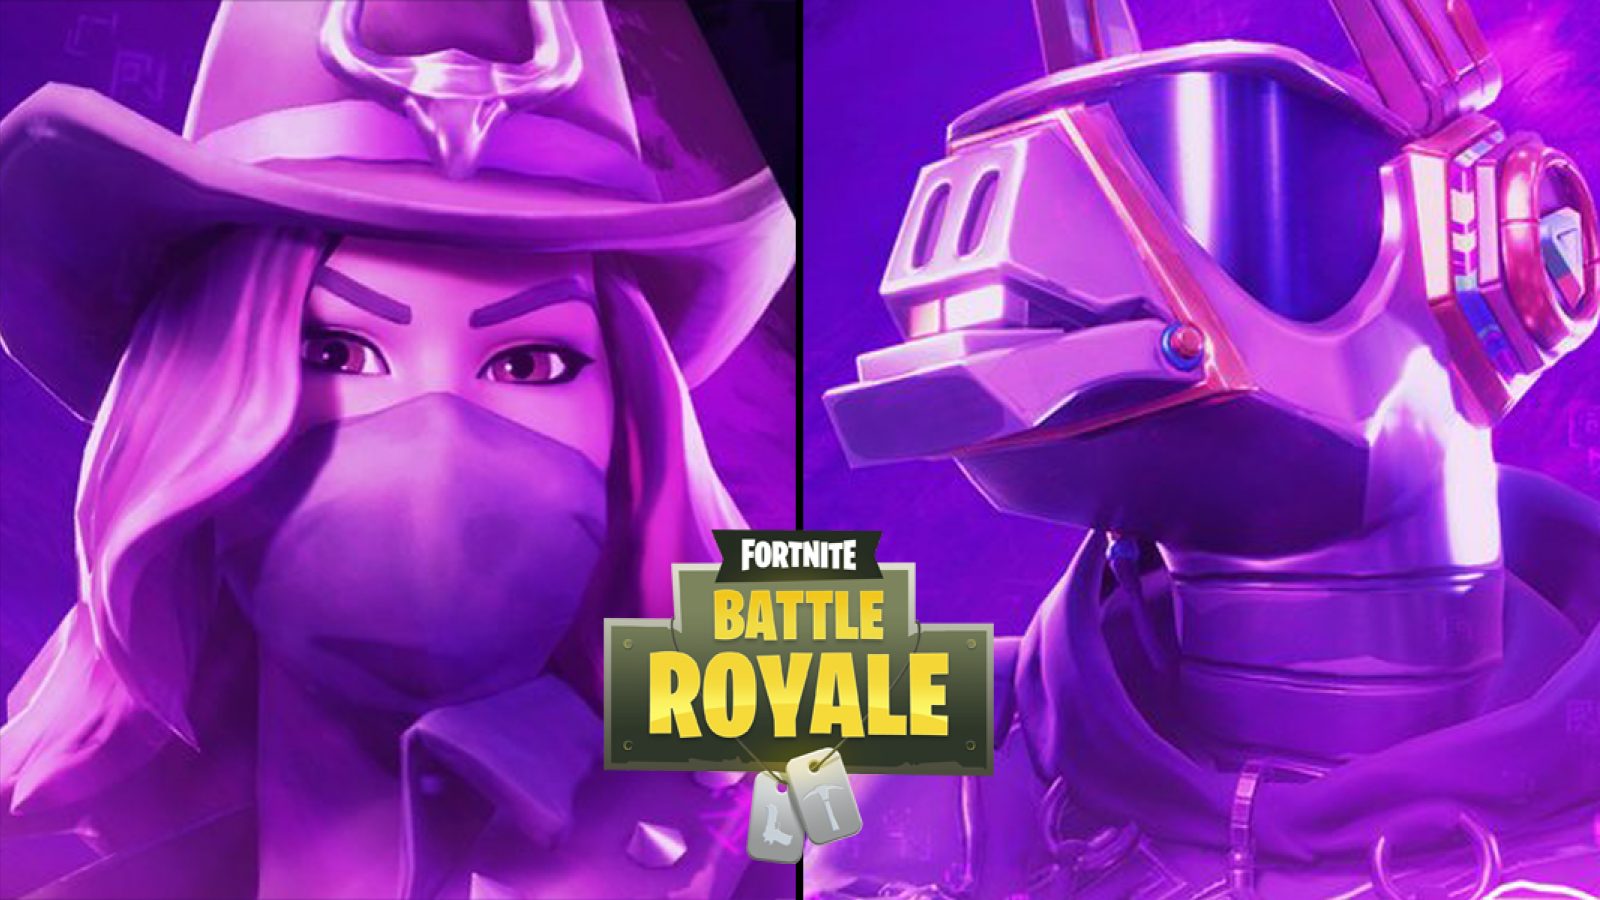 The Fortnite Season Teaser Image Seem To Be Forming A Bigger